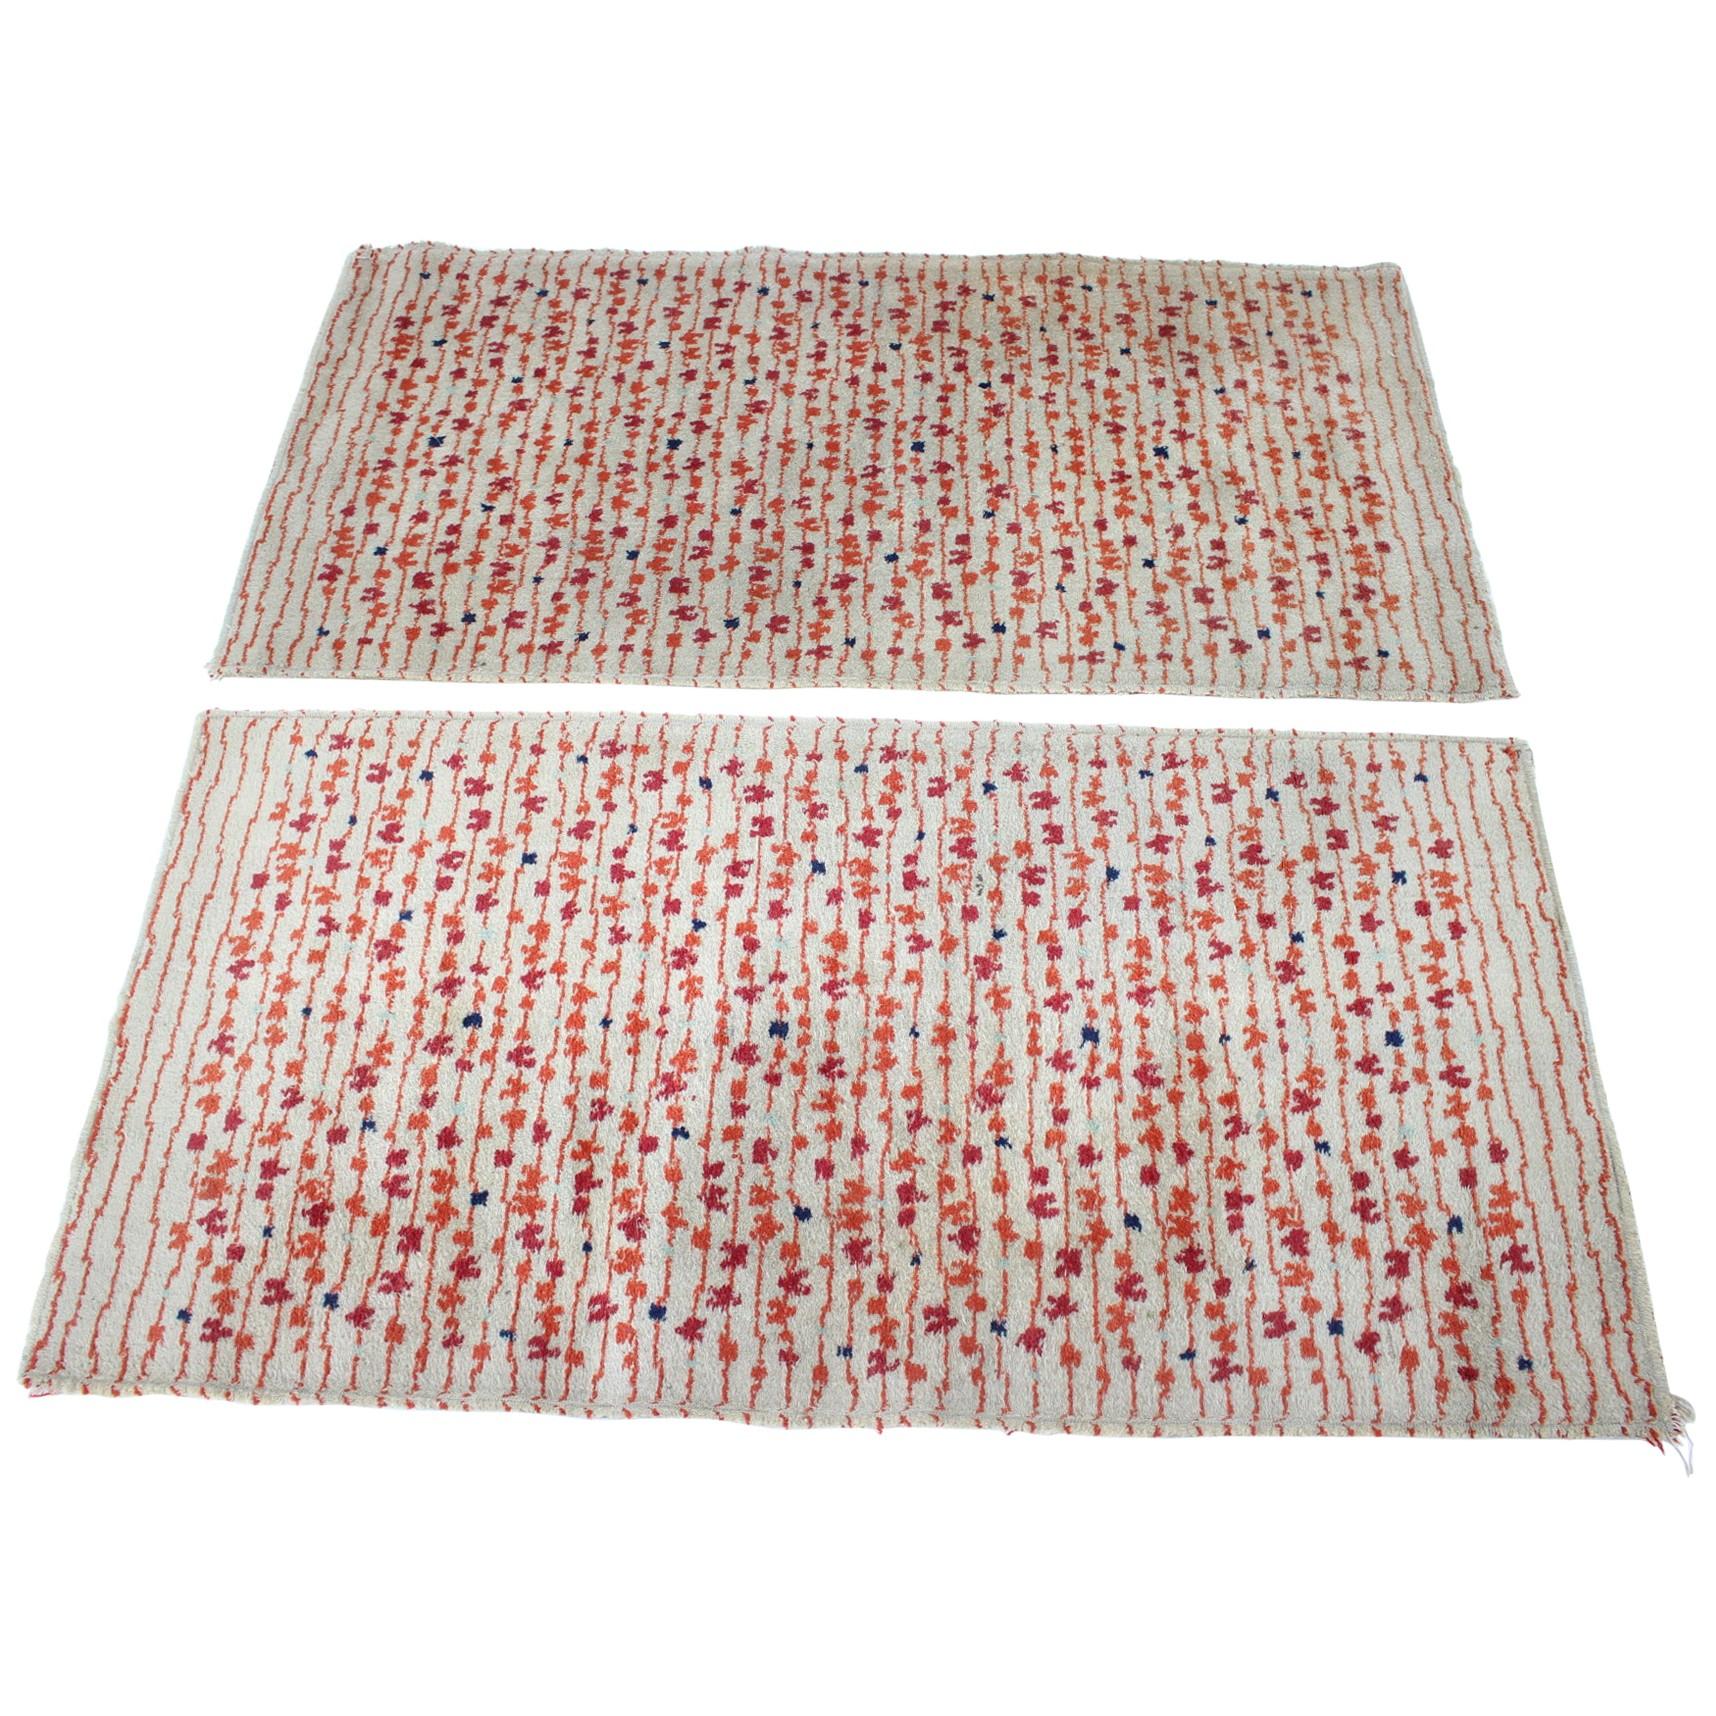 Pair of Design Abstract Modernist Carpets / Rugs, 1960s For Sale